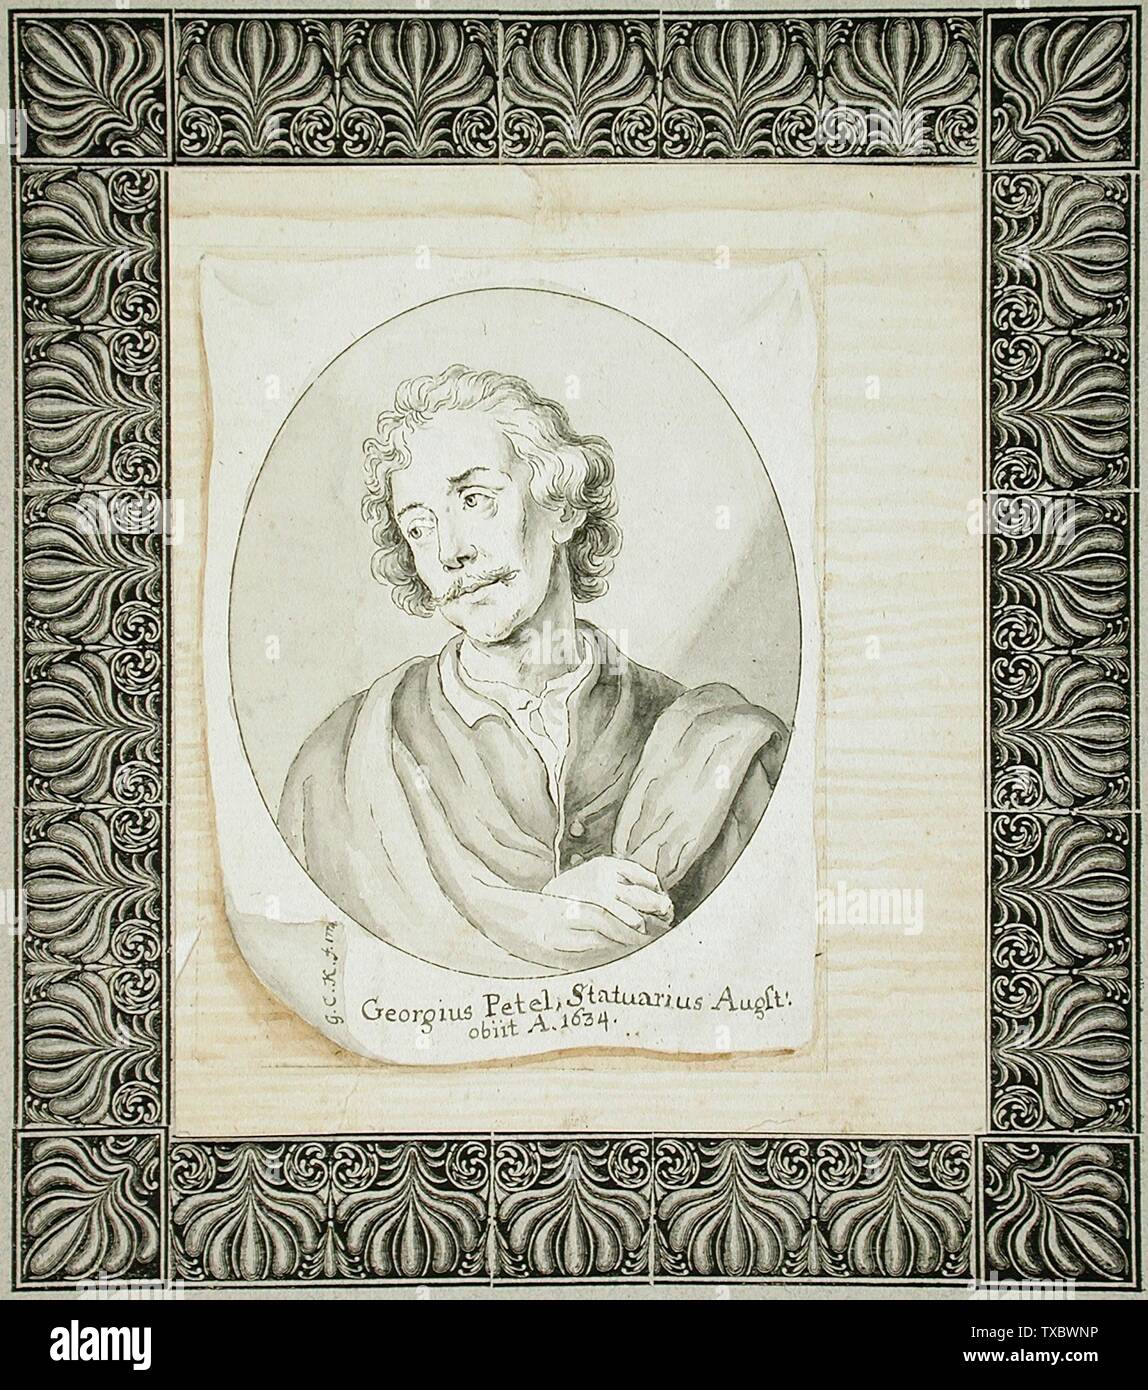 Portrait of George Petel;  Italy, 18th century Drawings Black ink and gray wash Gift of Mrs. Irene Salinger in memory of her father, Adolph Stern (54.70.3) Prints and Drawings; 18th century date QS:P571,+1750-00-00T00:00:00Z/7; Stock Photo